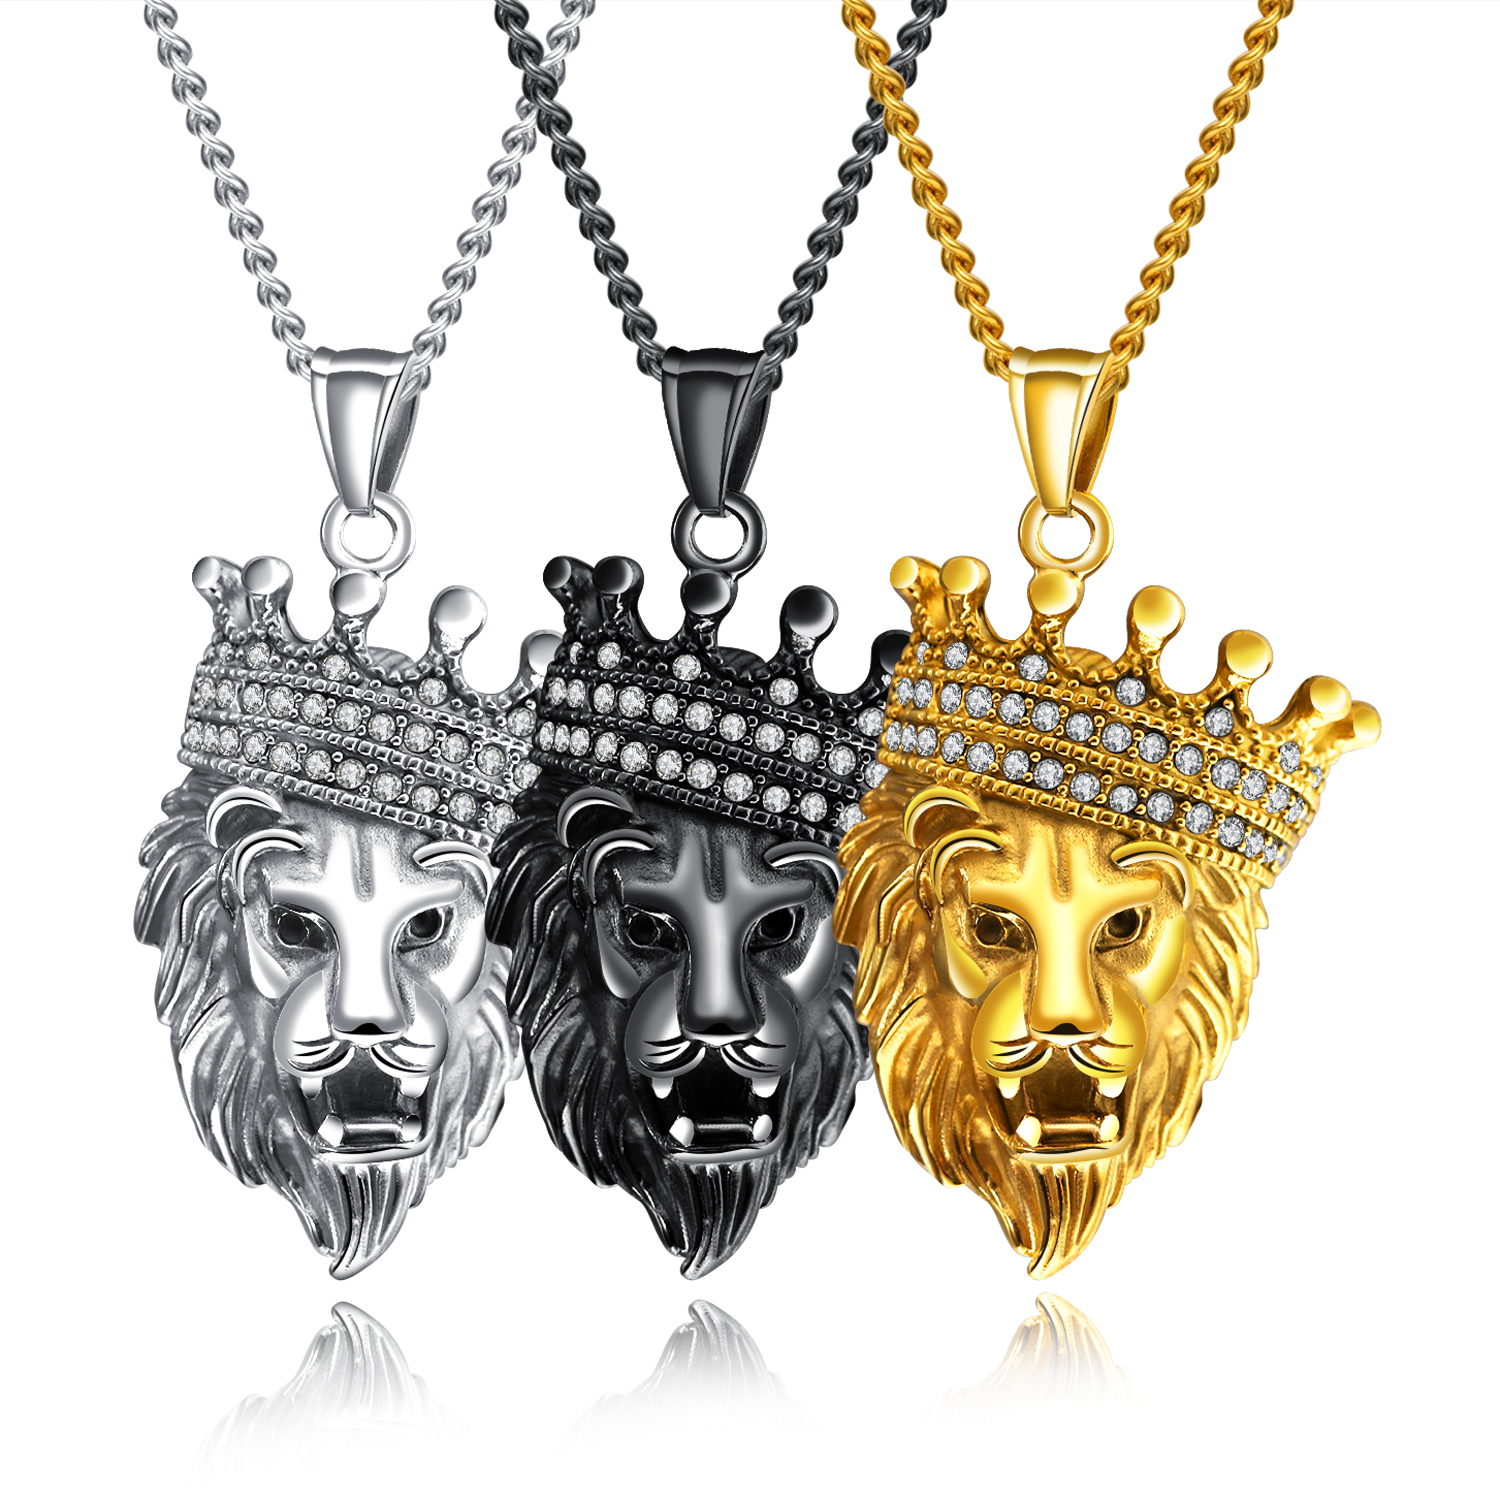 Unique Stainless Steel Crown Lion Head Necklace GX1379B